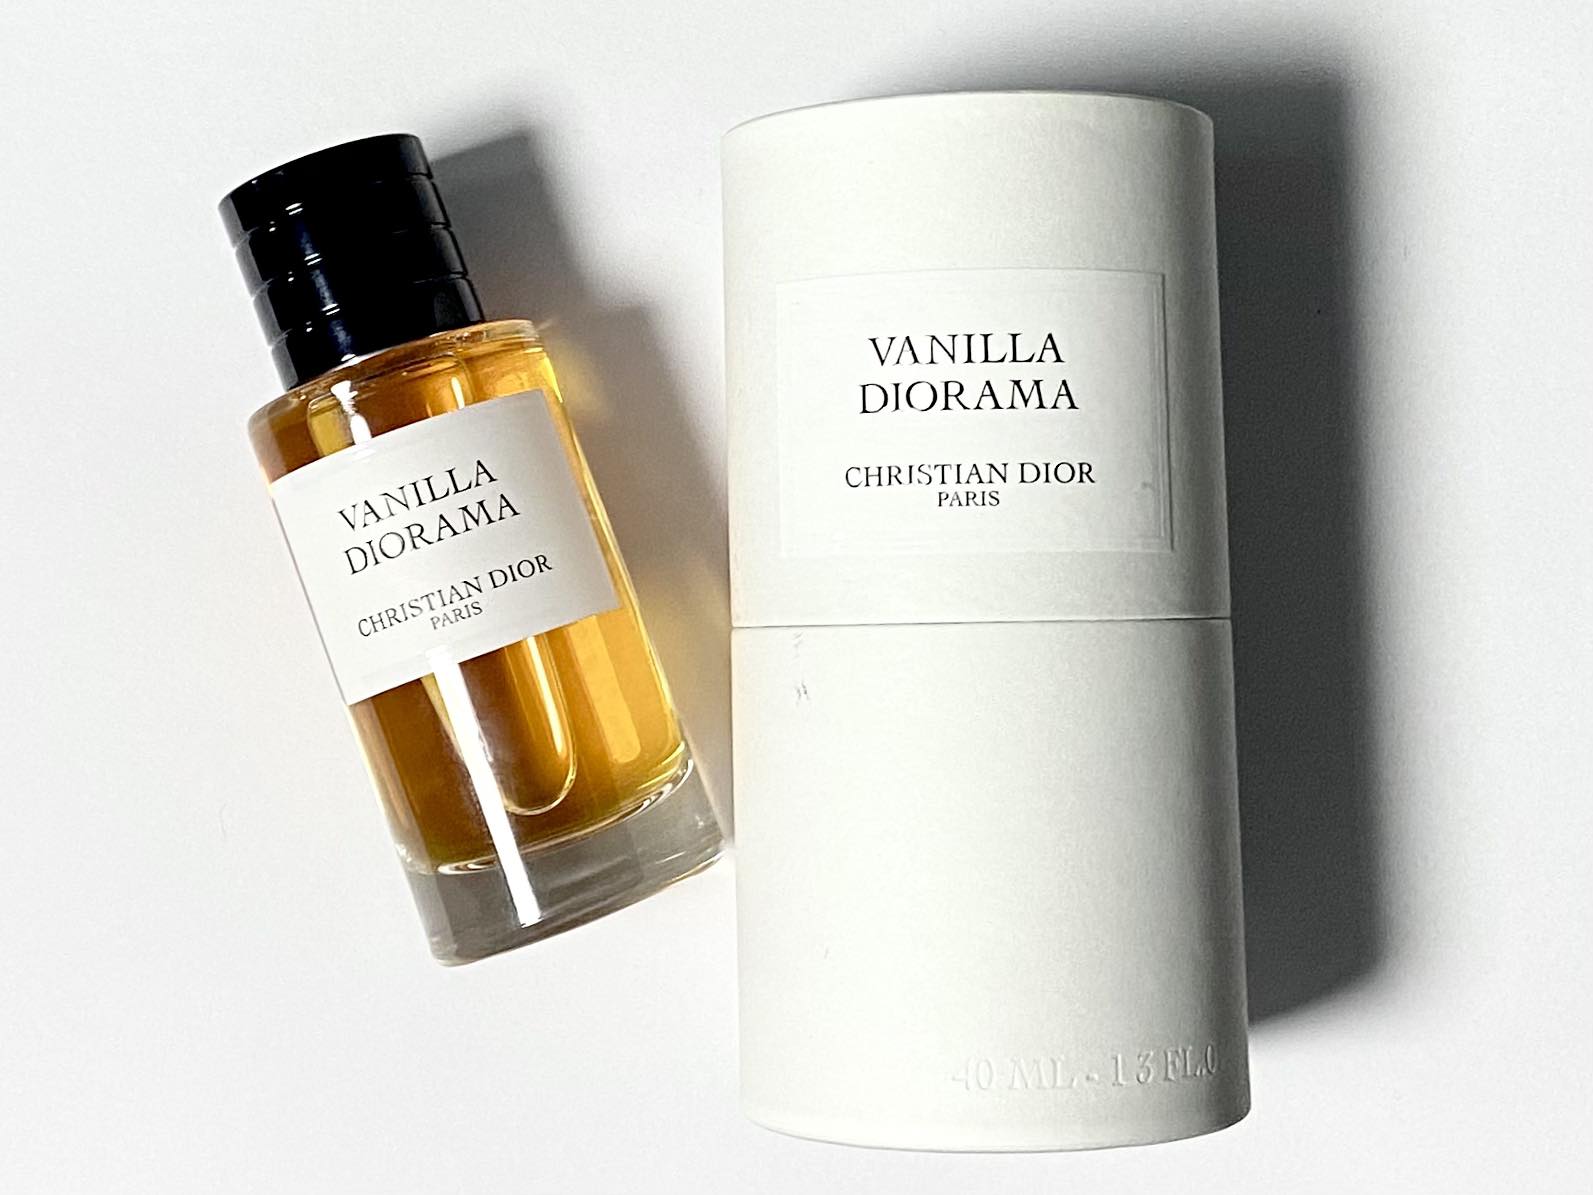 Vanilla Diorama by DIOR | Fragrance Posse One thing NEW